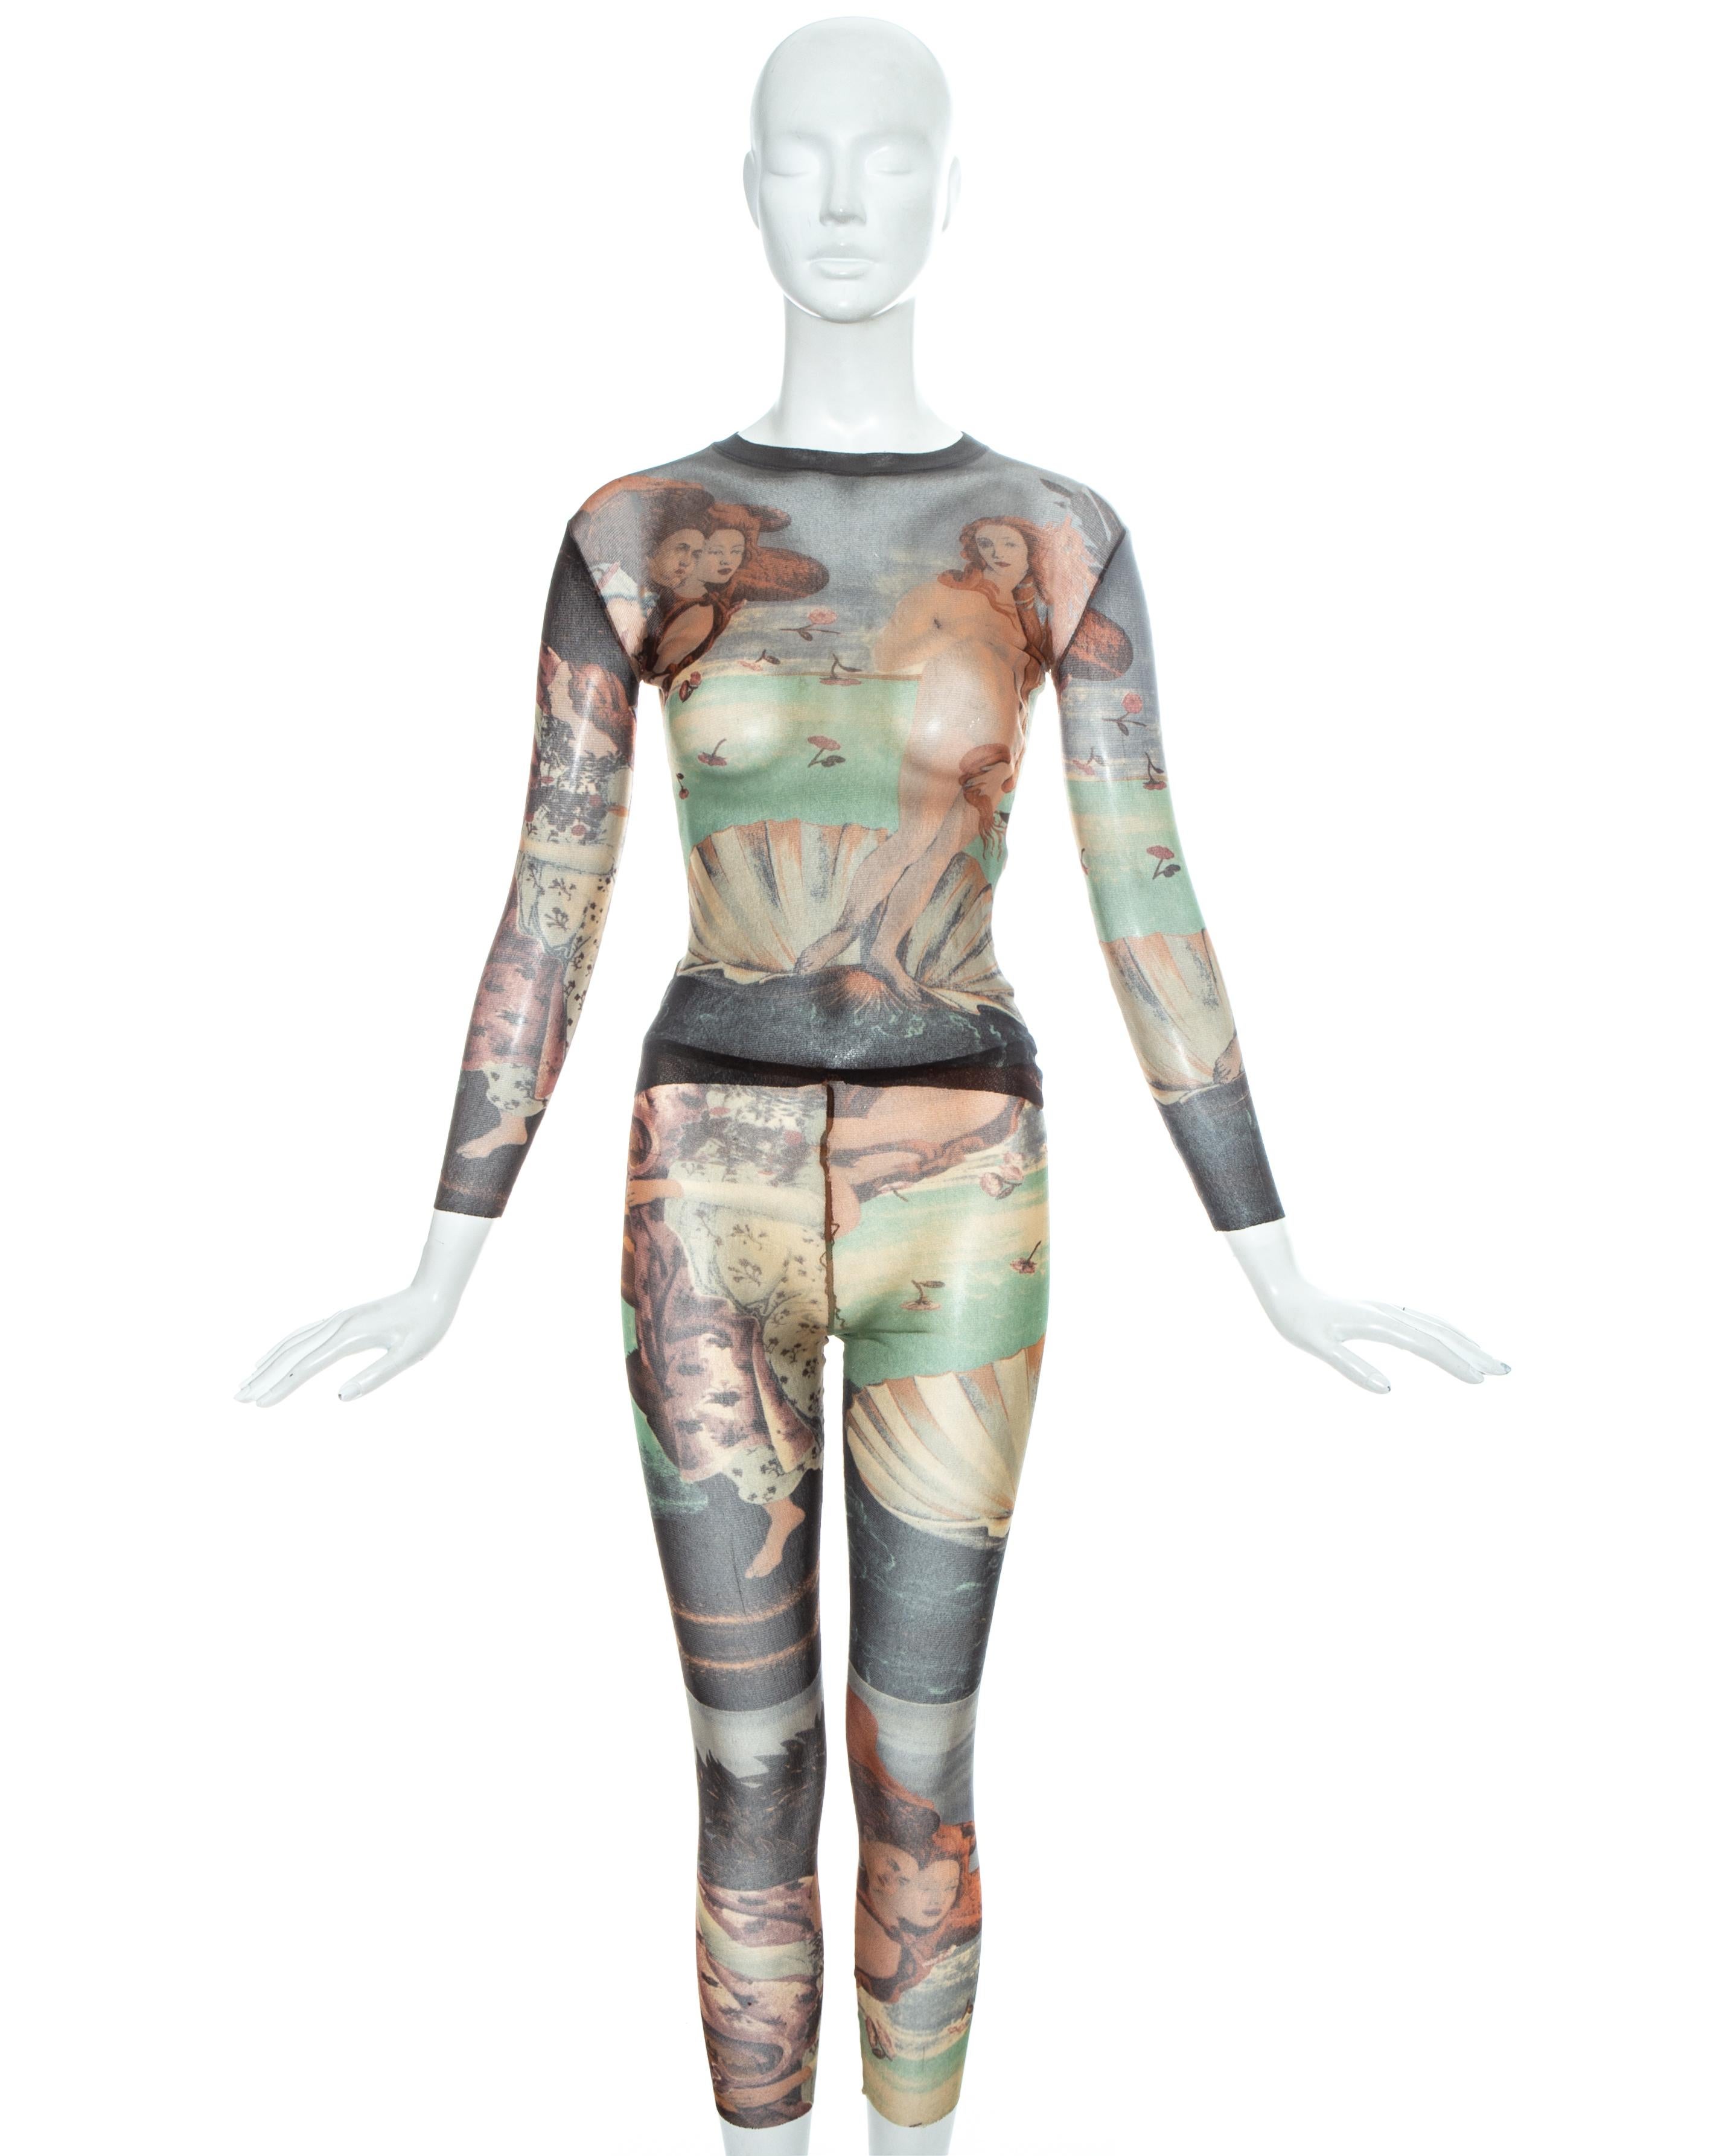 Jean Paul Gaultier mesh top and leggings with print produced from 'The Birth of Venus' by Sandro Botticelli (1485–1486)

Spring-Summer 1995